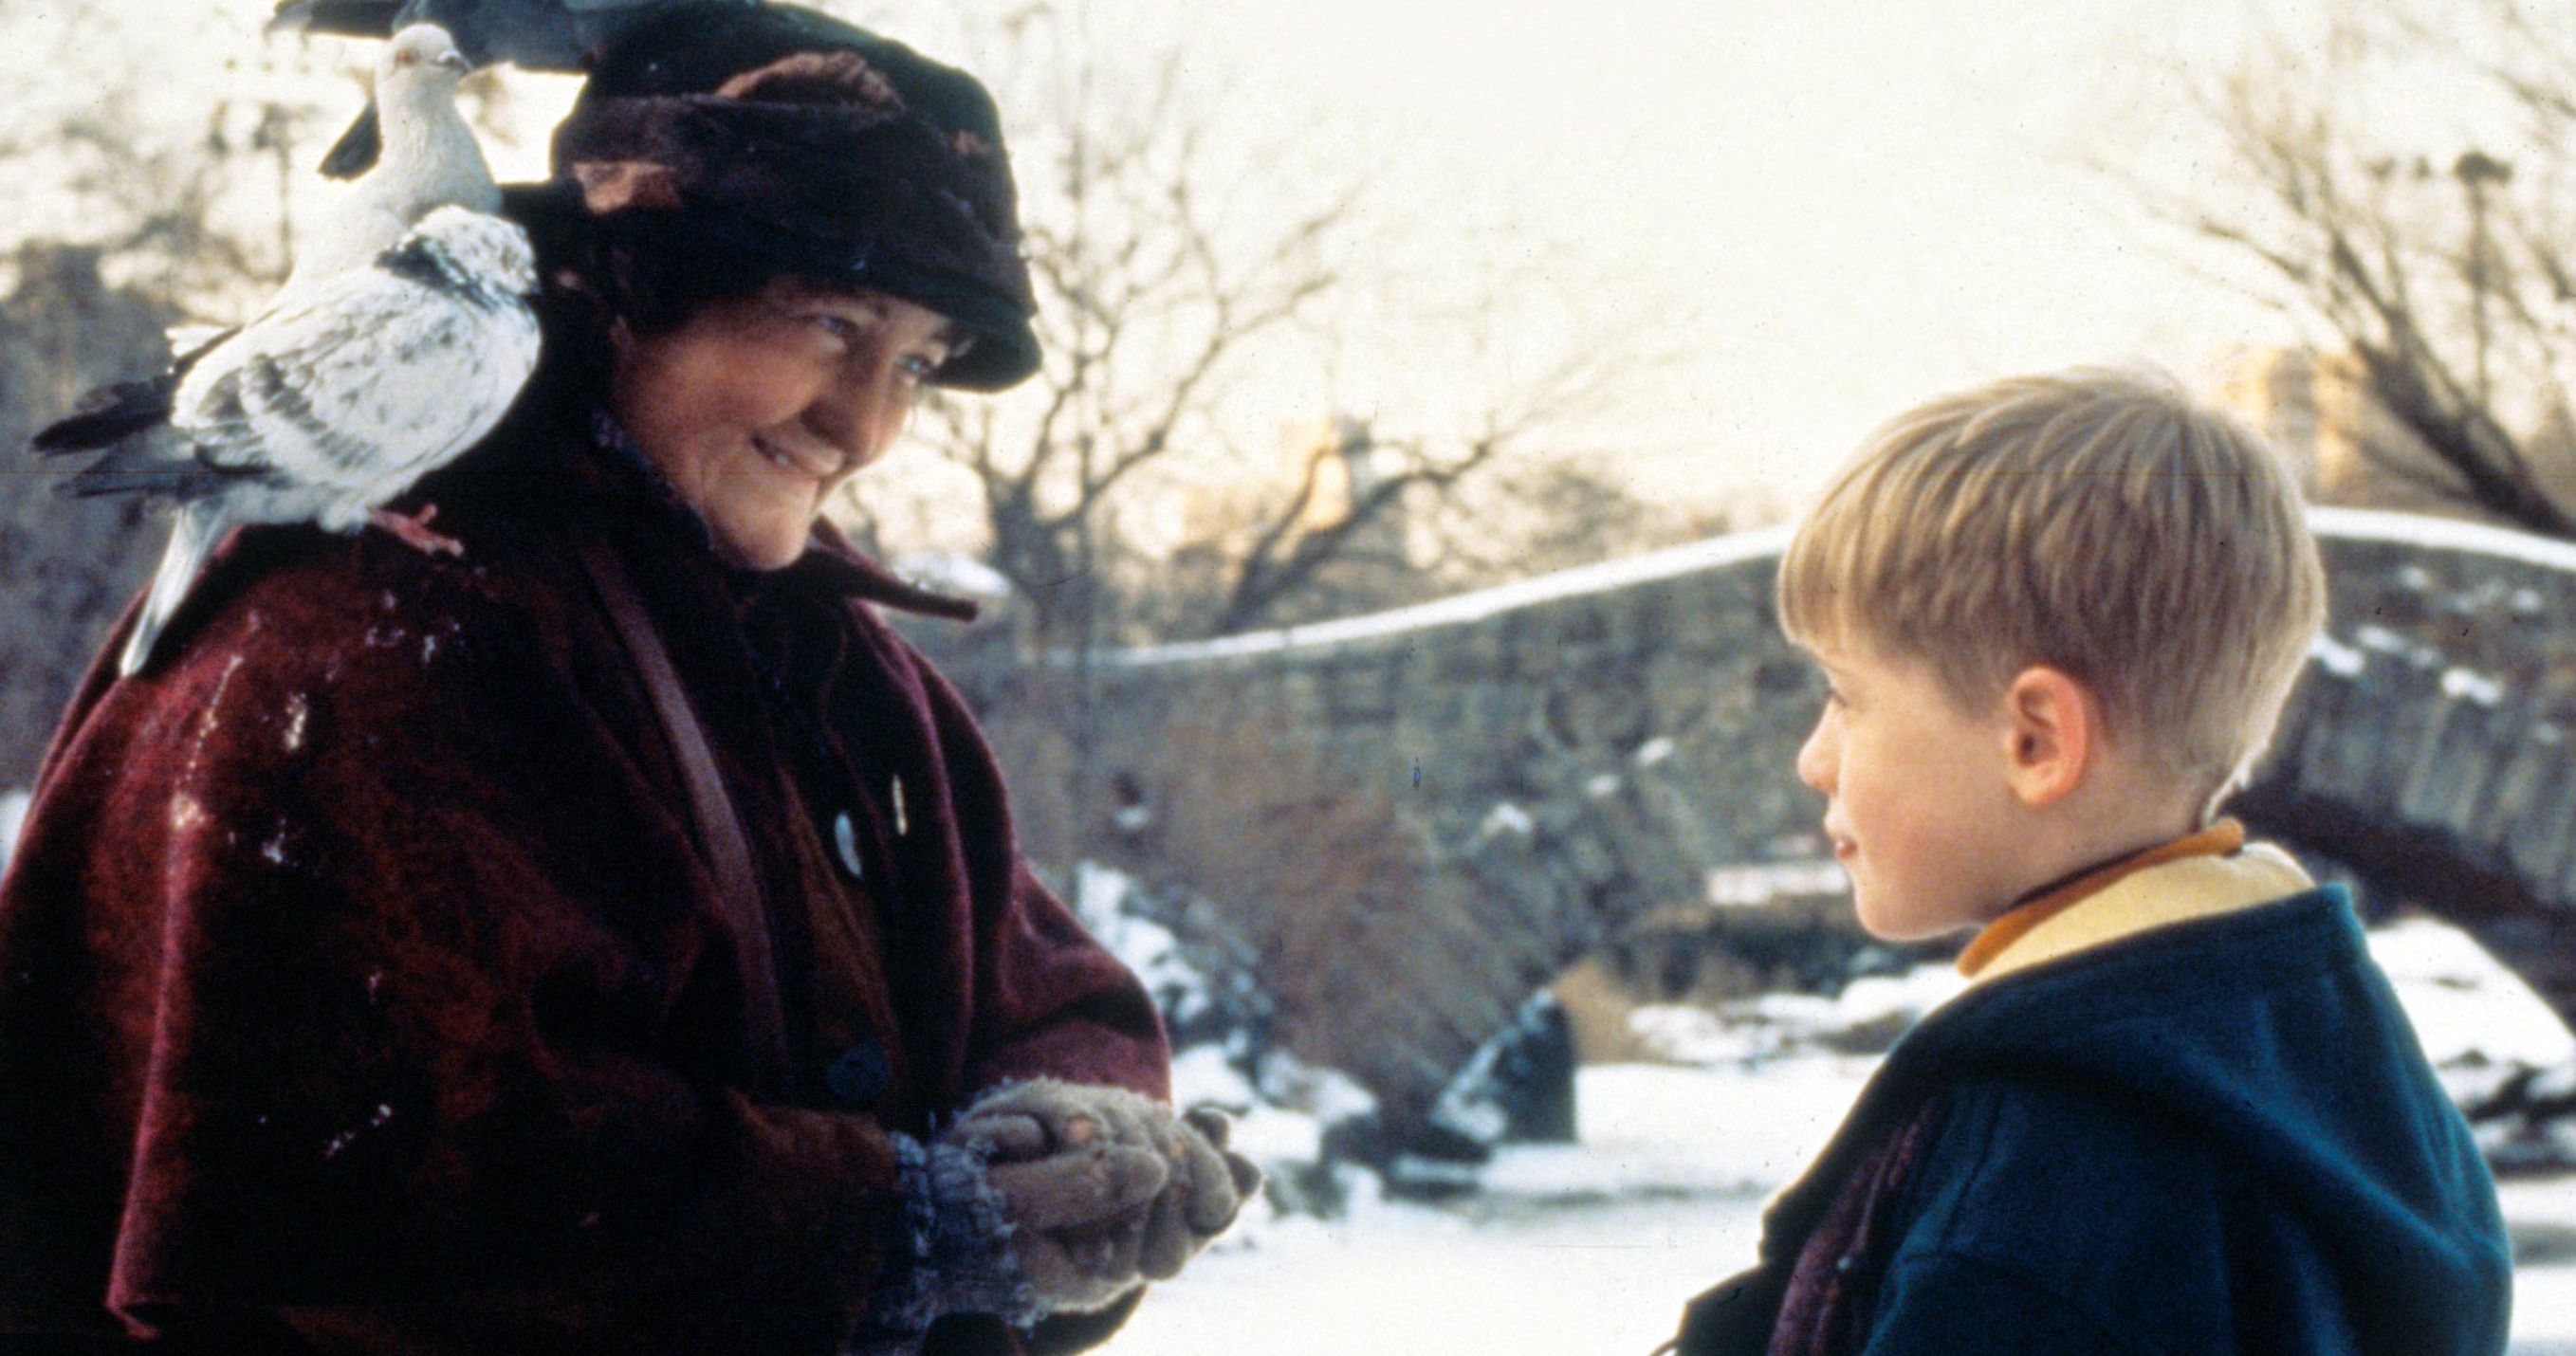 Home Alone 2 Pigeon Lady Brenda Fricker Will Sadly Spend This Dark Christmas Alone